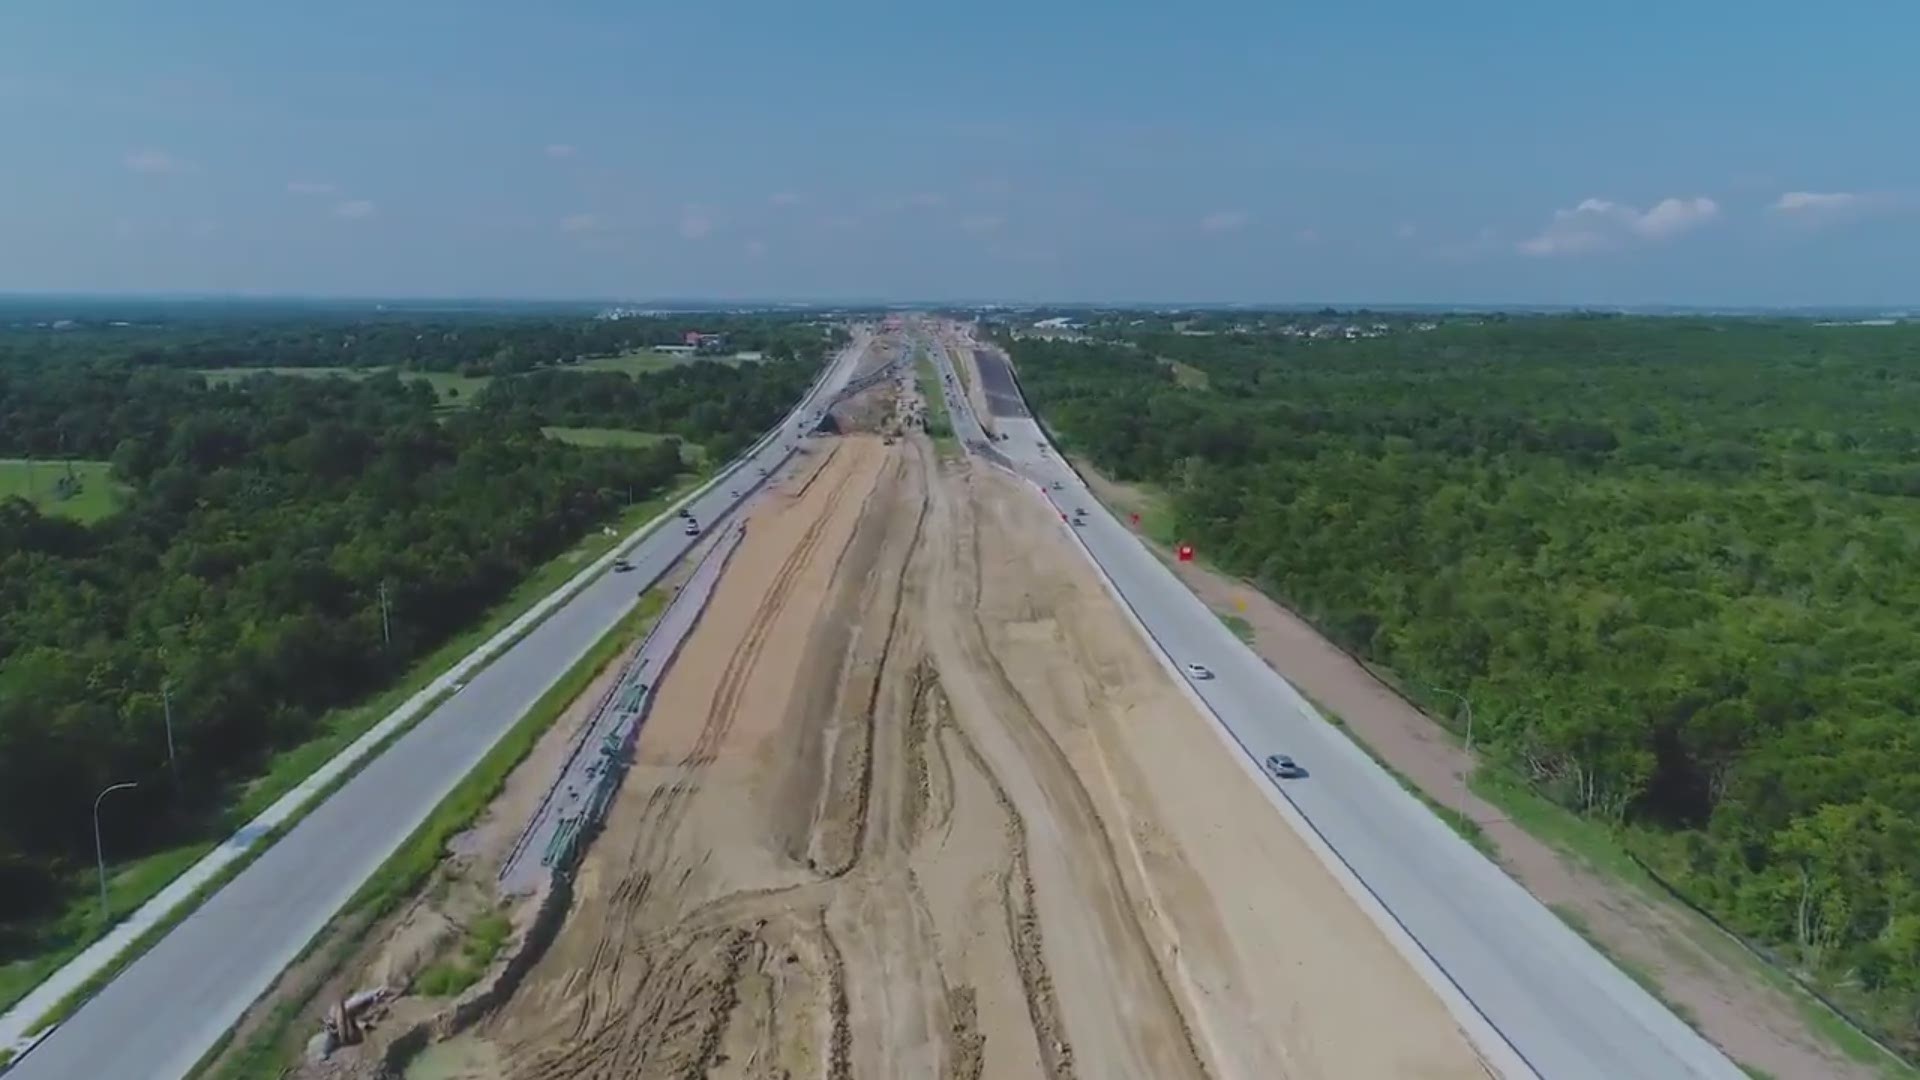 New video from the Mobility Authority shows progress along U.S. 183 in Austin. The project, which is on schedule, will add toll lanes to Austin Bergstrom International Airport.